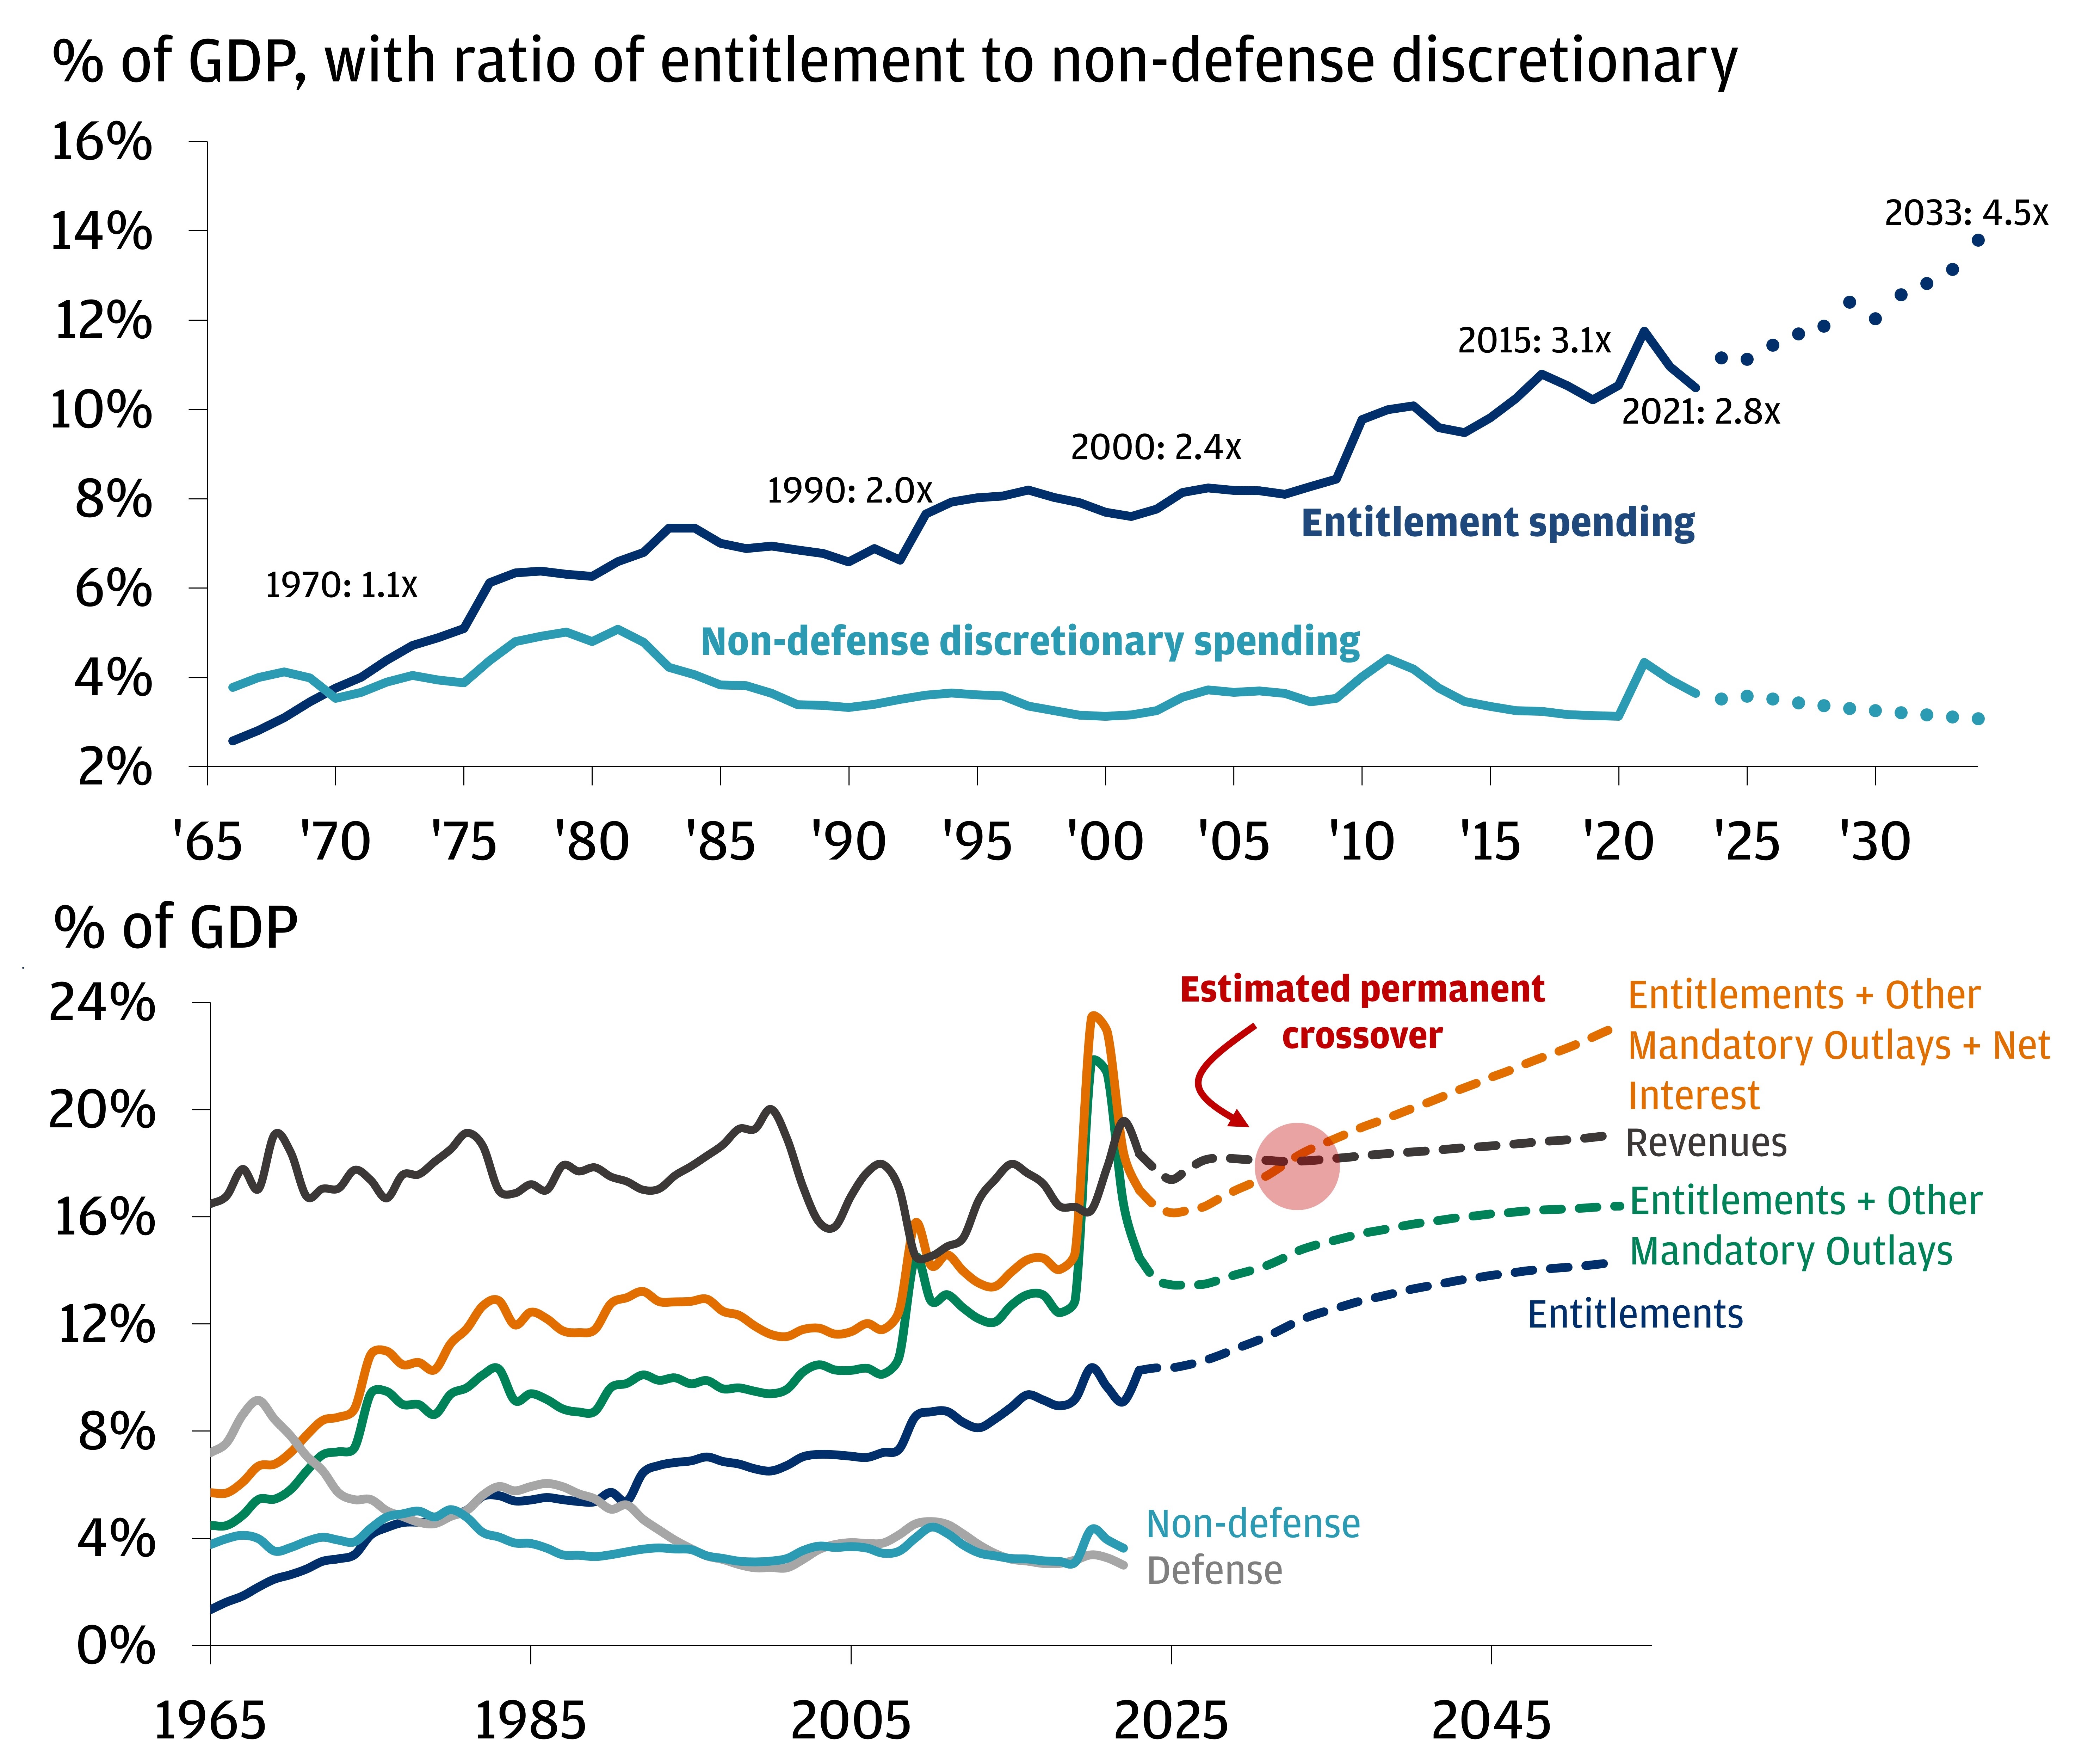 The top chart shows entitlement spending and non-defense discretionary spending from December 1965 to December 2033. The bottom chart shows the entitlements + other mandatory outlays + net interest, revenues, entitlements + other mandatory outlays, entitlements, non-defense and defense from 1965 to 2053.